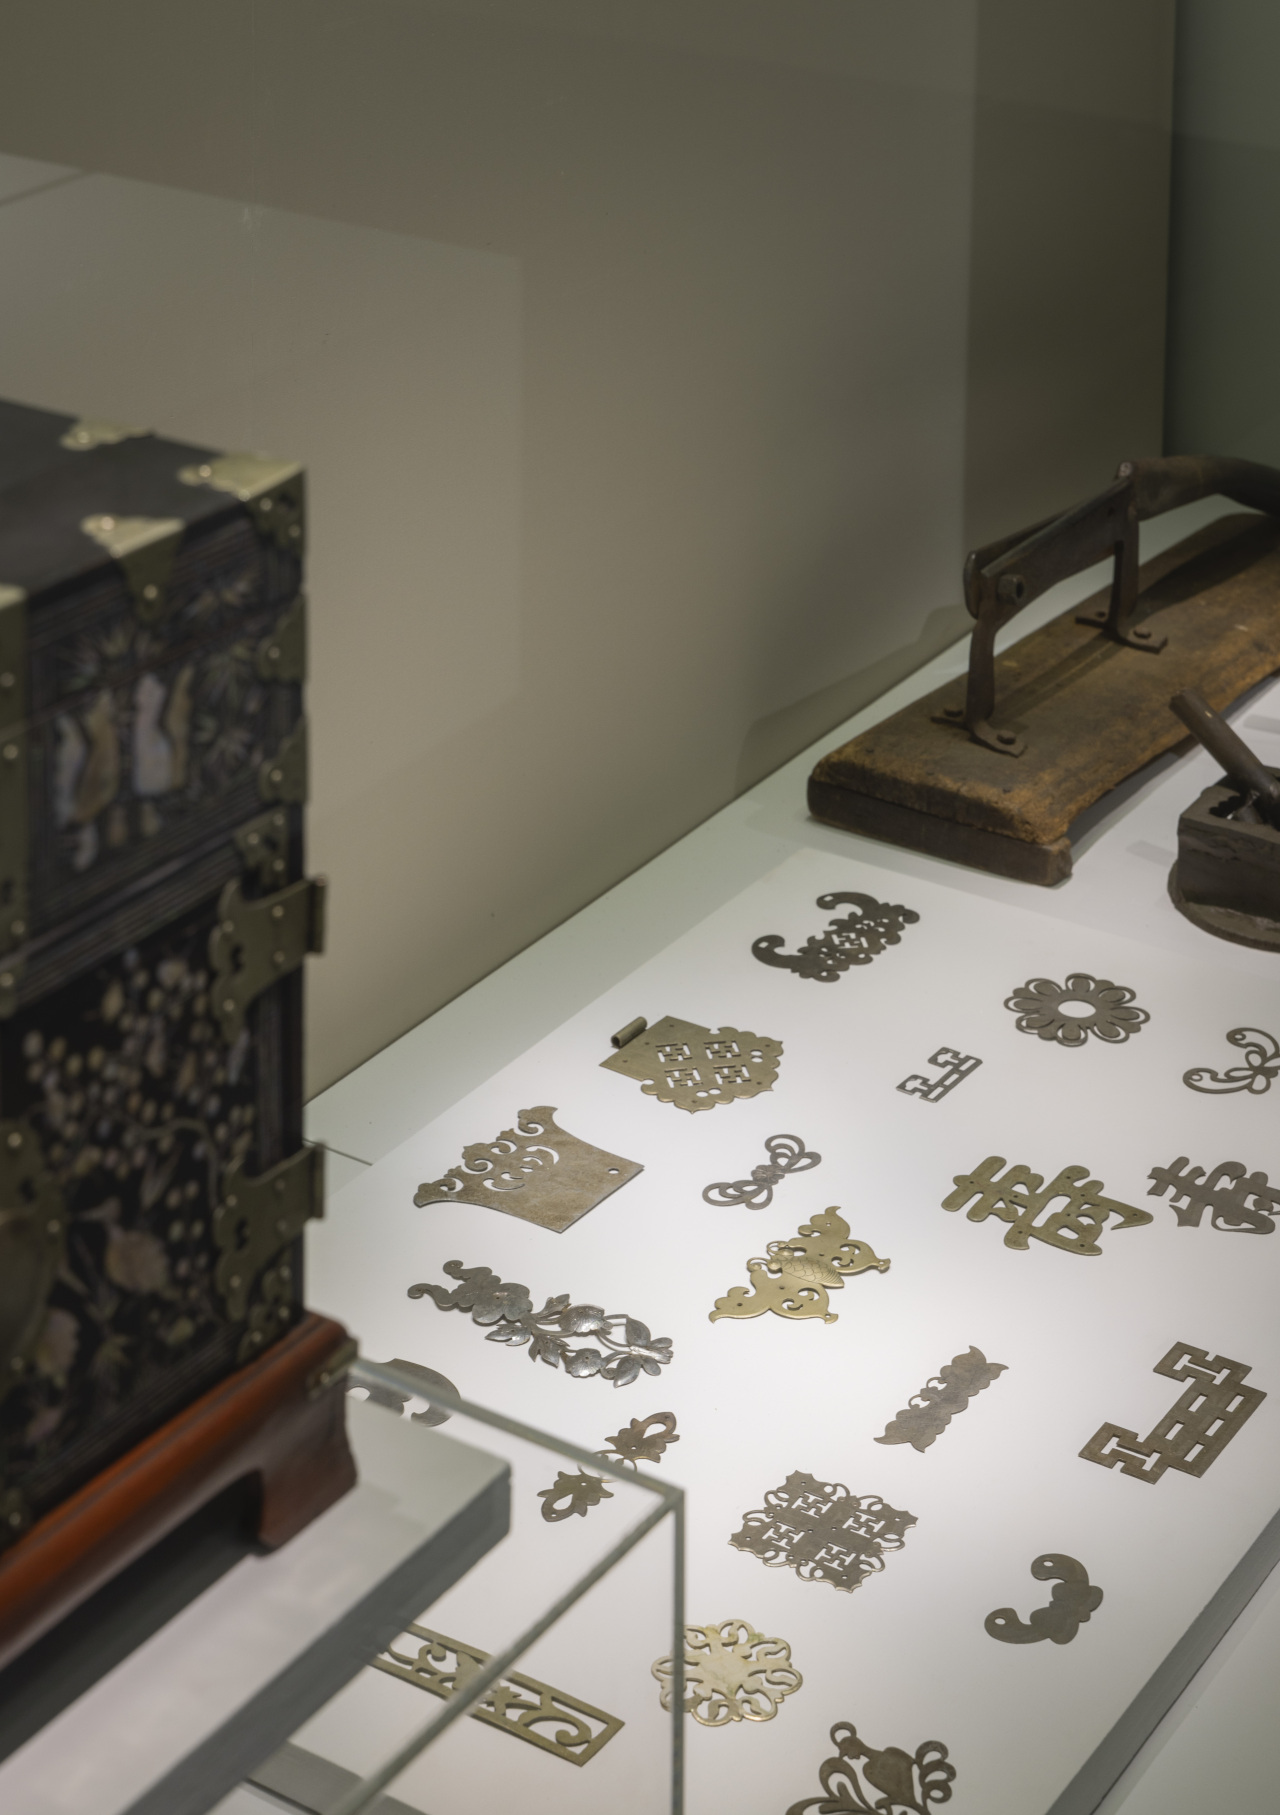 Metal ornamental decorations used for wooden furniture are on display at “Hands to Art; Inspired by 12 Studios” at Tongyeong City Museum. (Tongyeong Triennale)